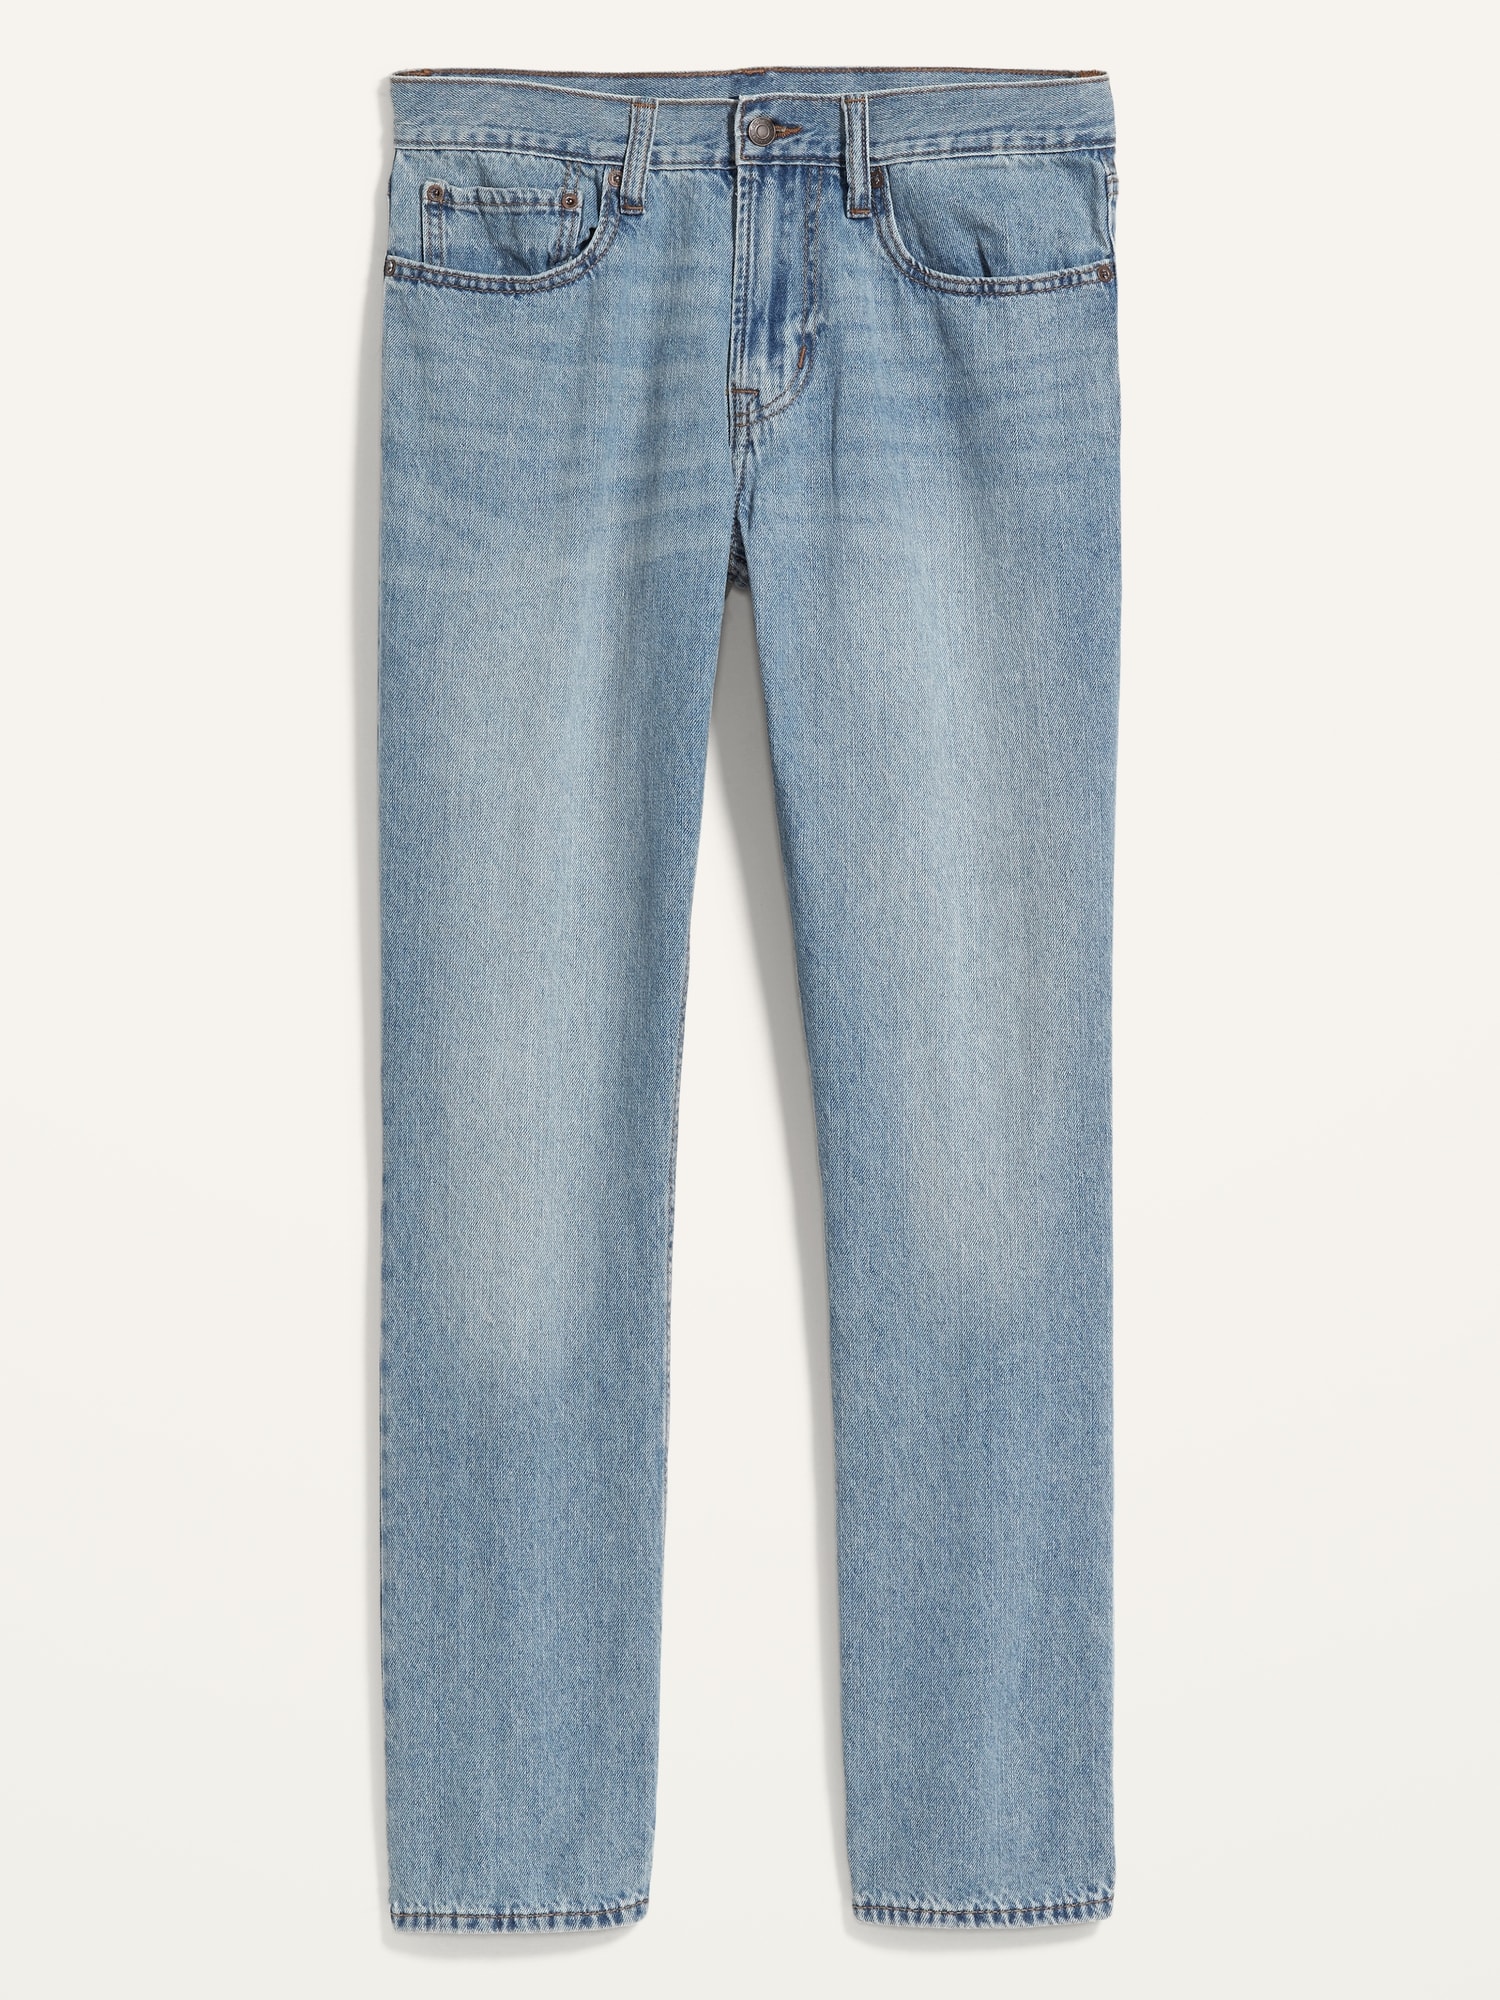 Straight Non-Stretch Jeans for Men ...